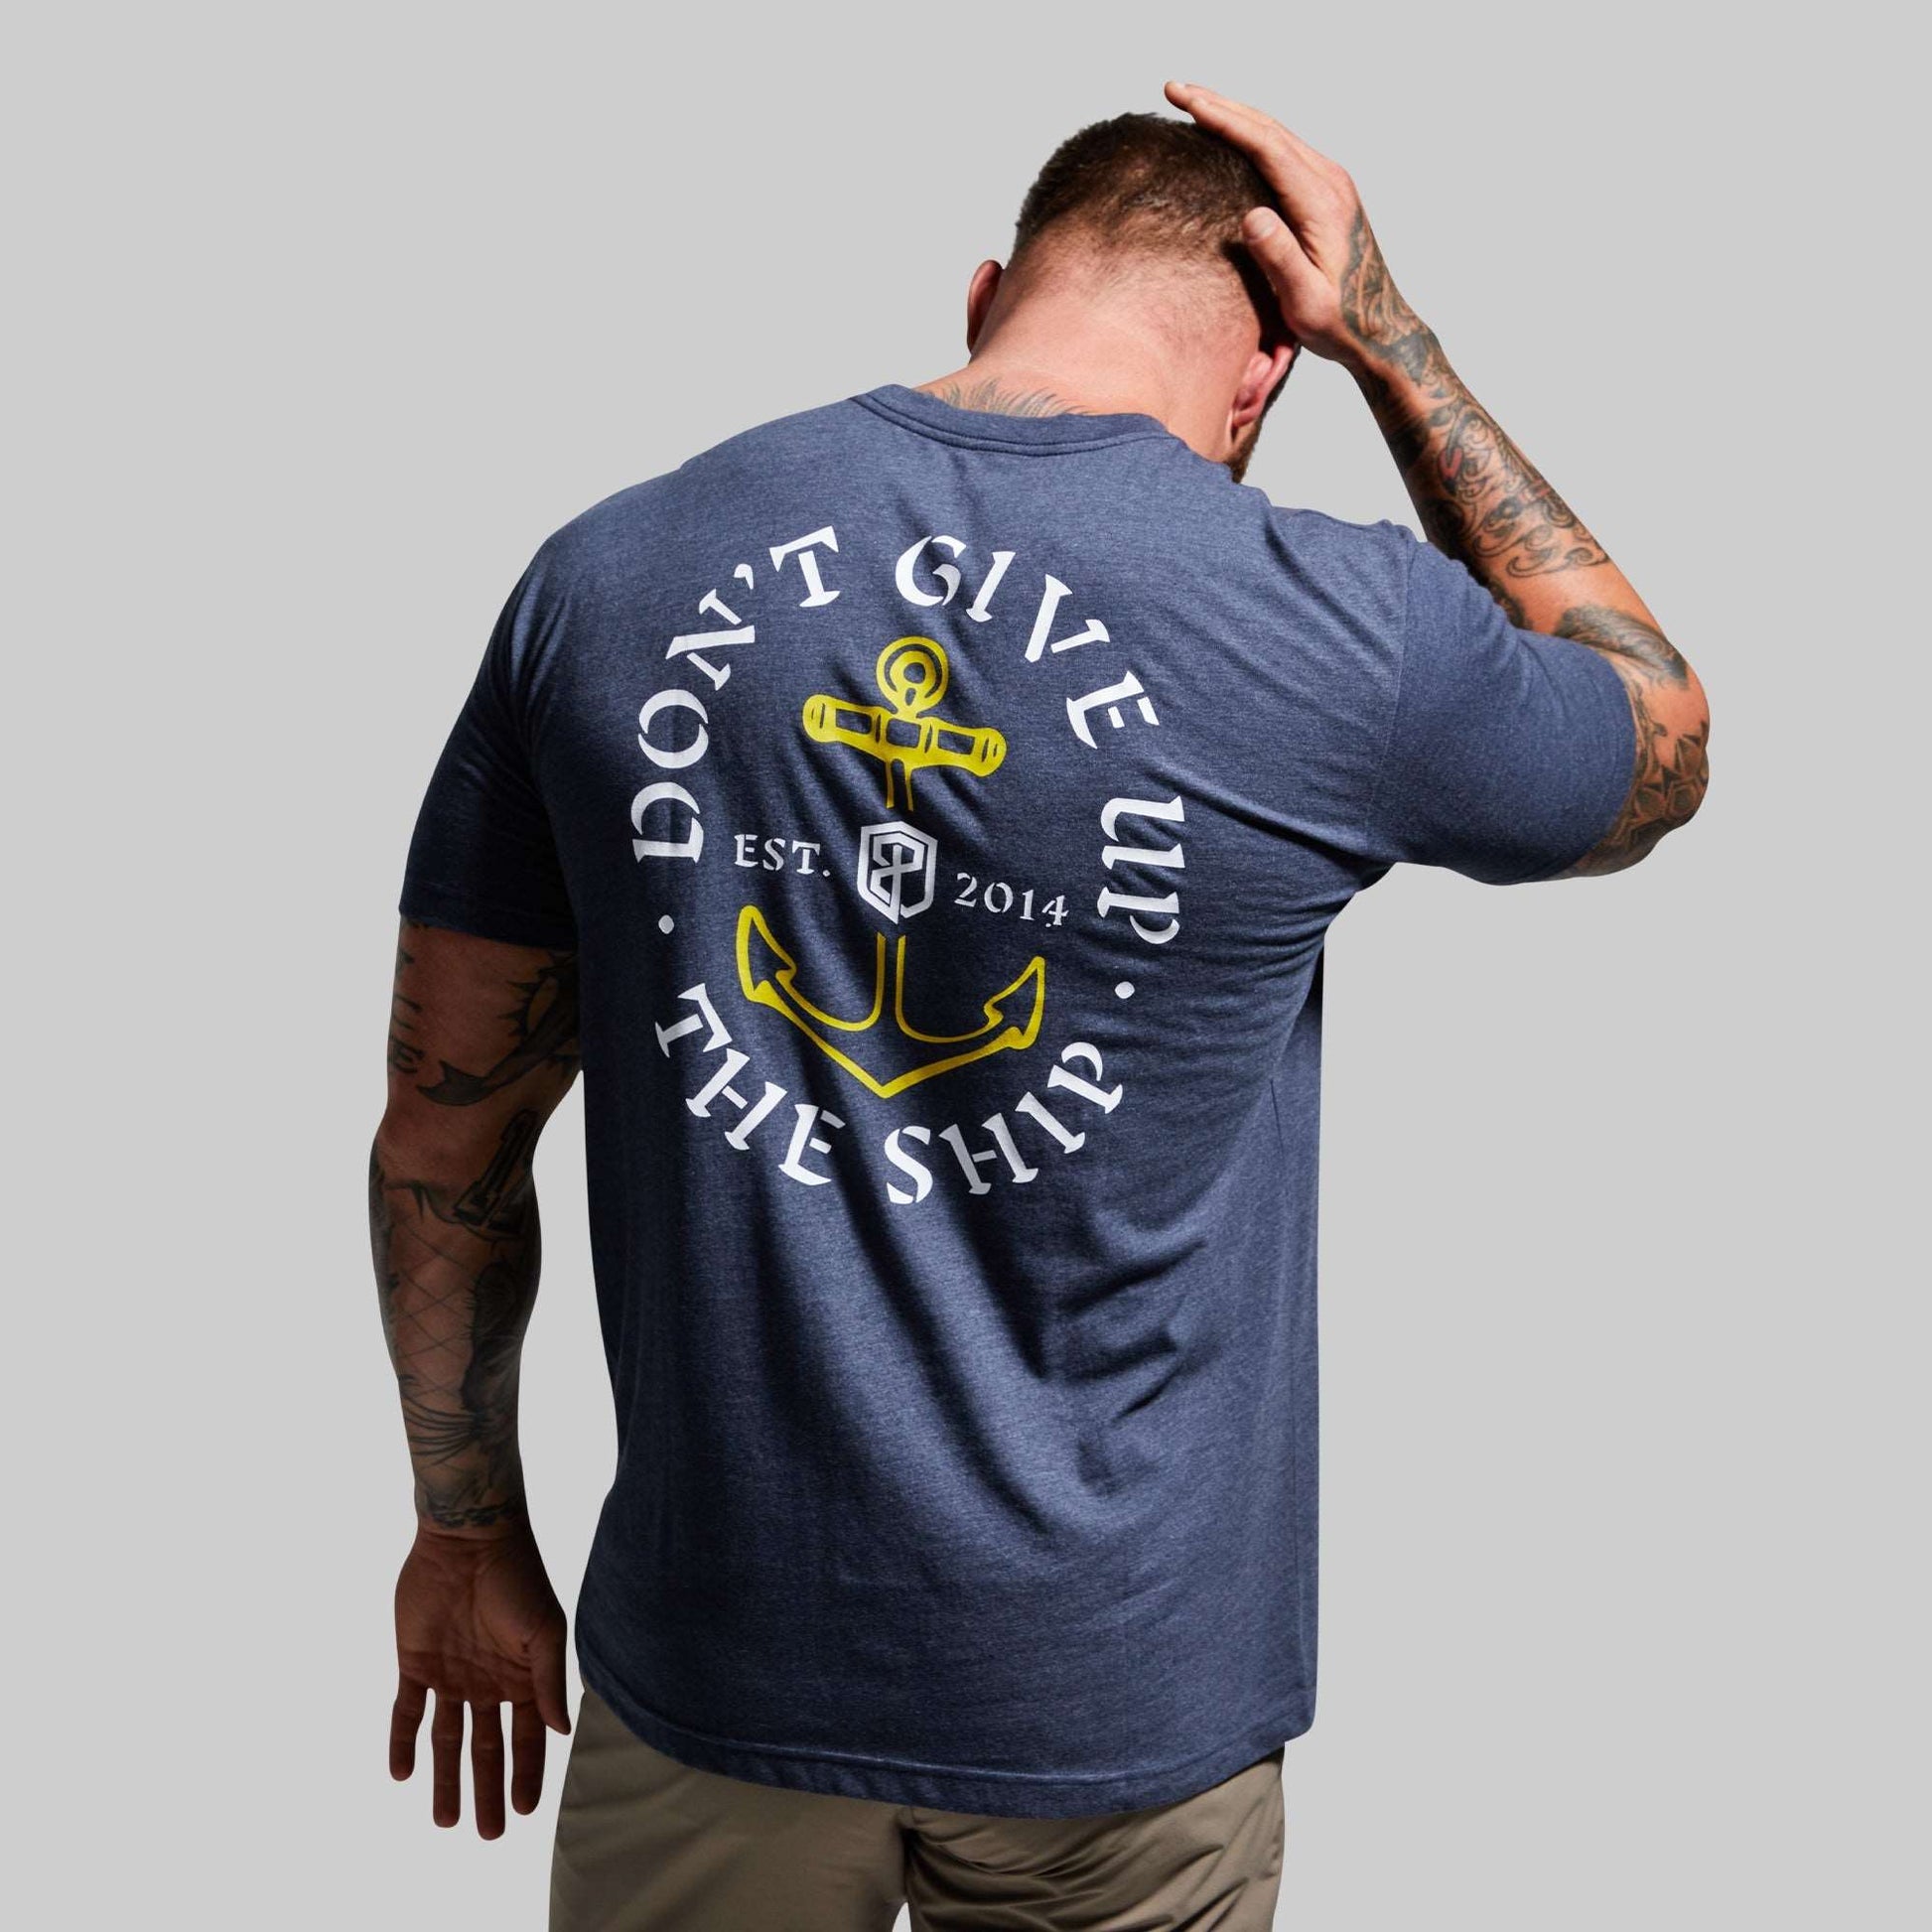 Don't Give Up The Ship T-Shirt (Navy)